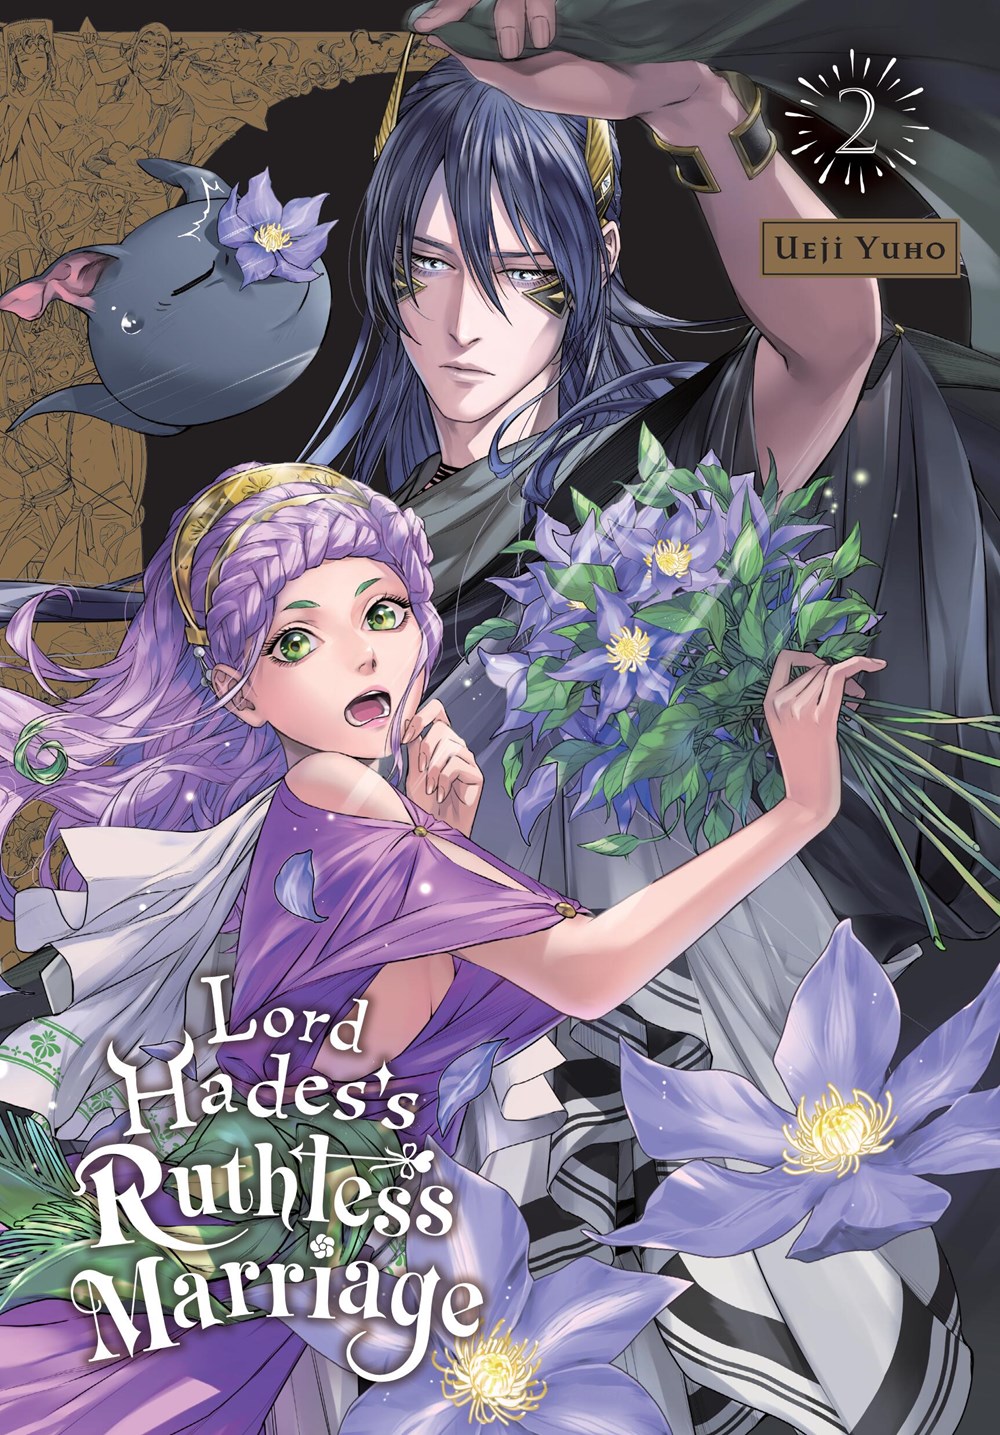 Lord Hades's Ruthless Marriage Manga Volume 2 image count 0